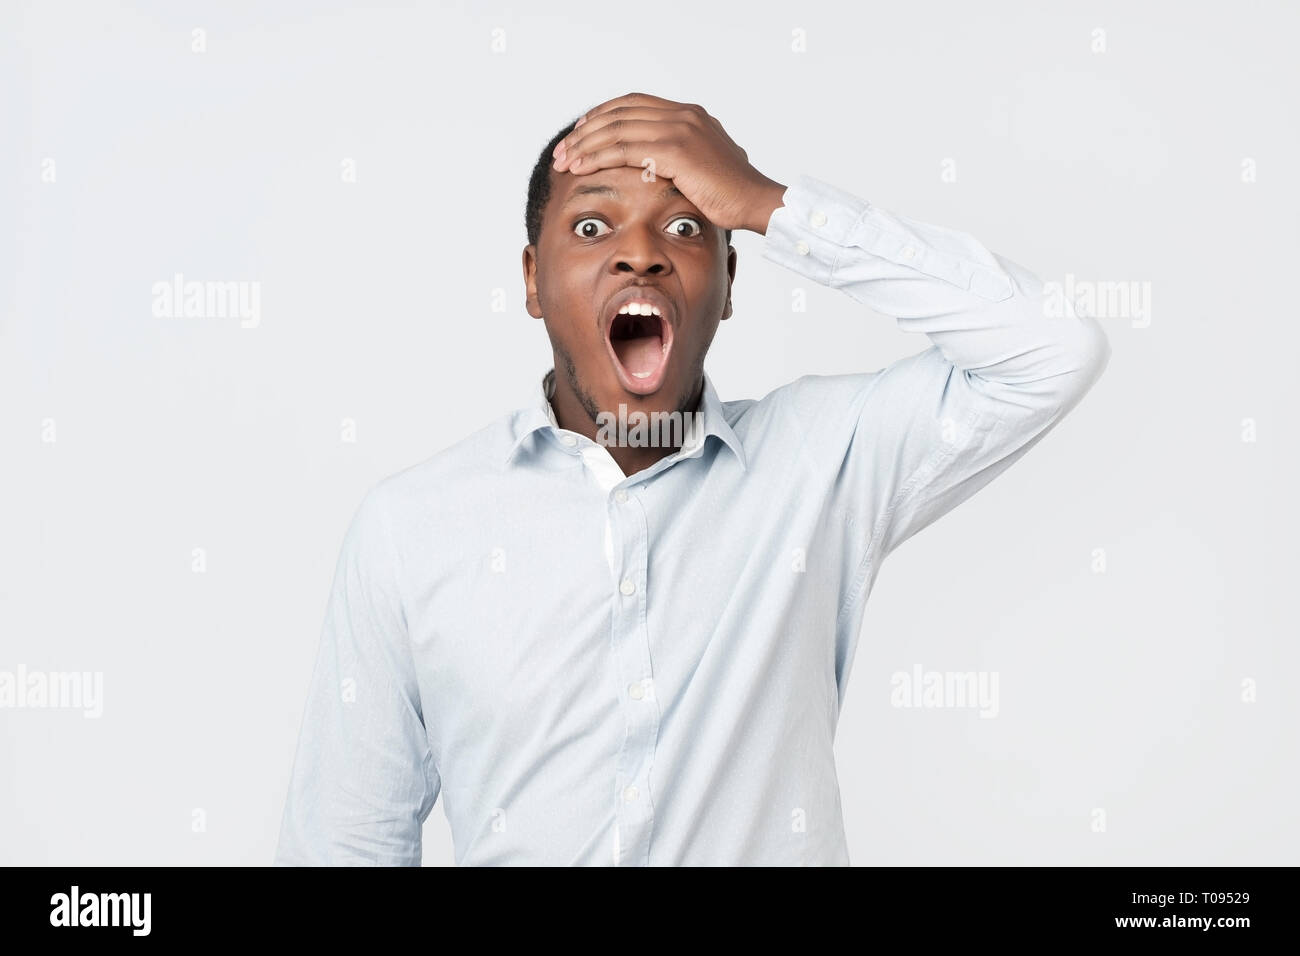 Shocked black male says wow, looks bugged eyes and rounded mouth, being amazed Stock Photo